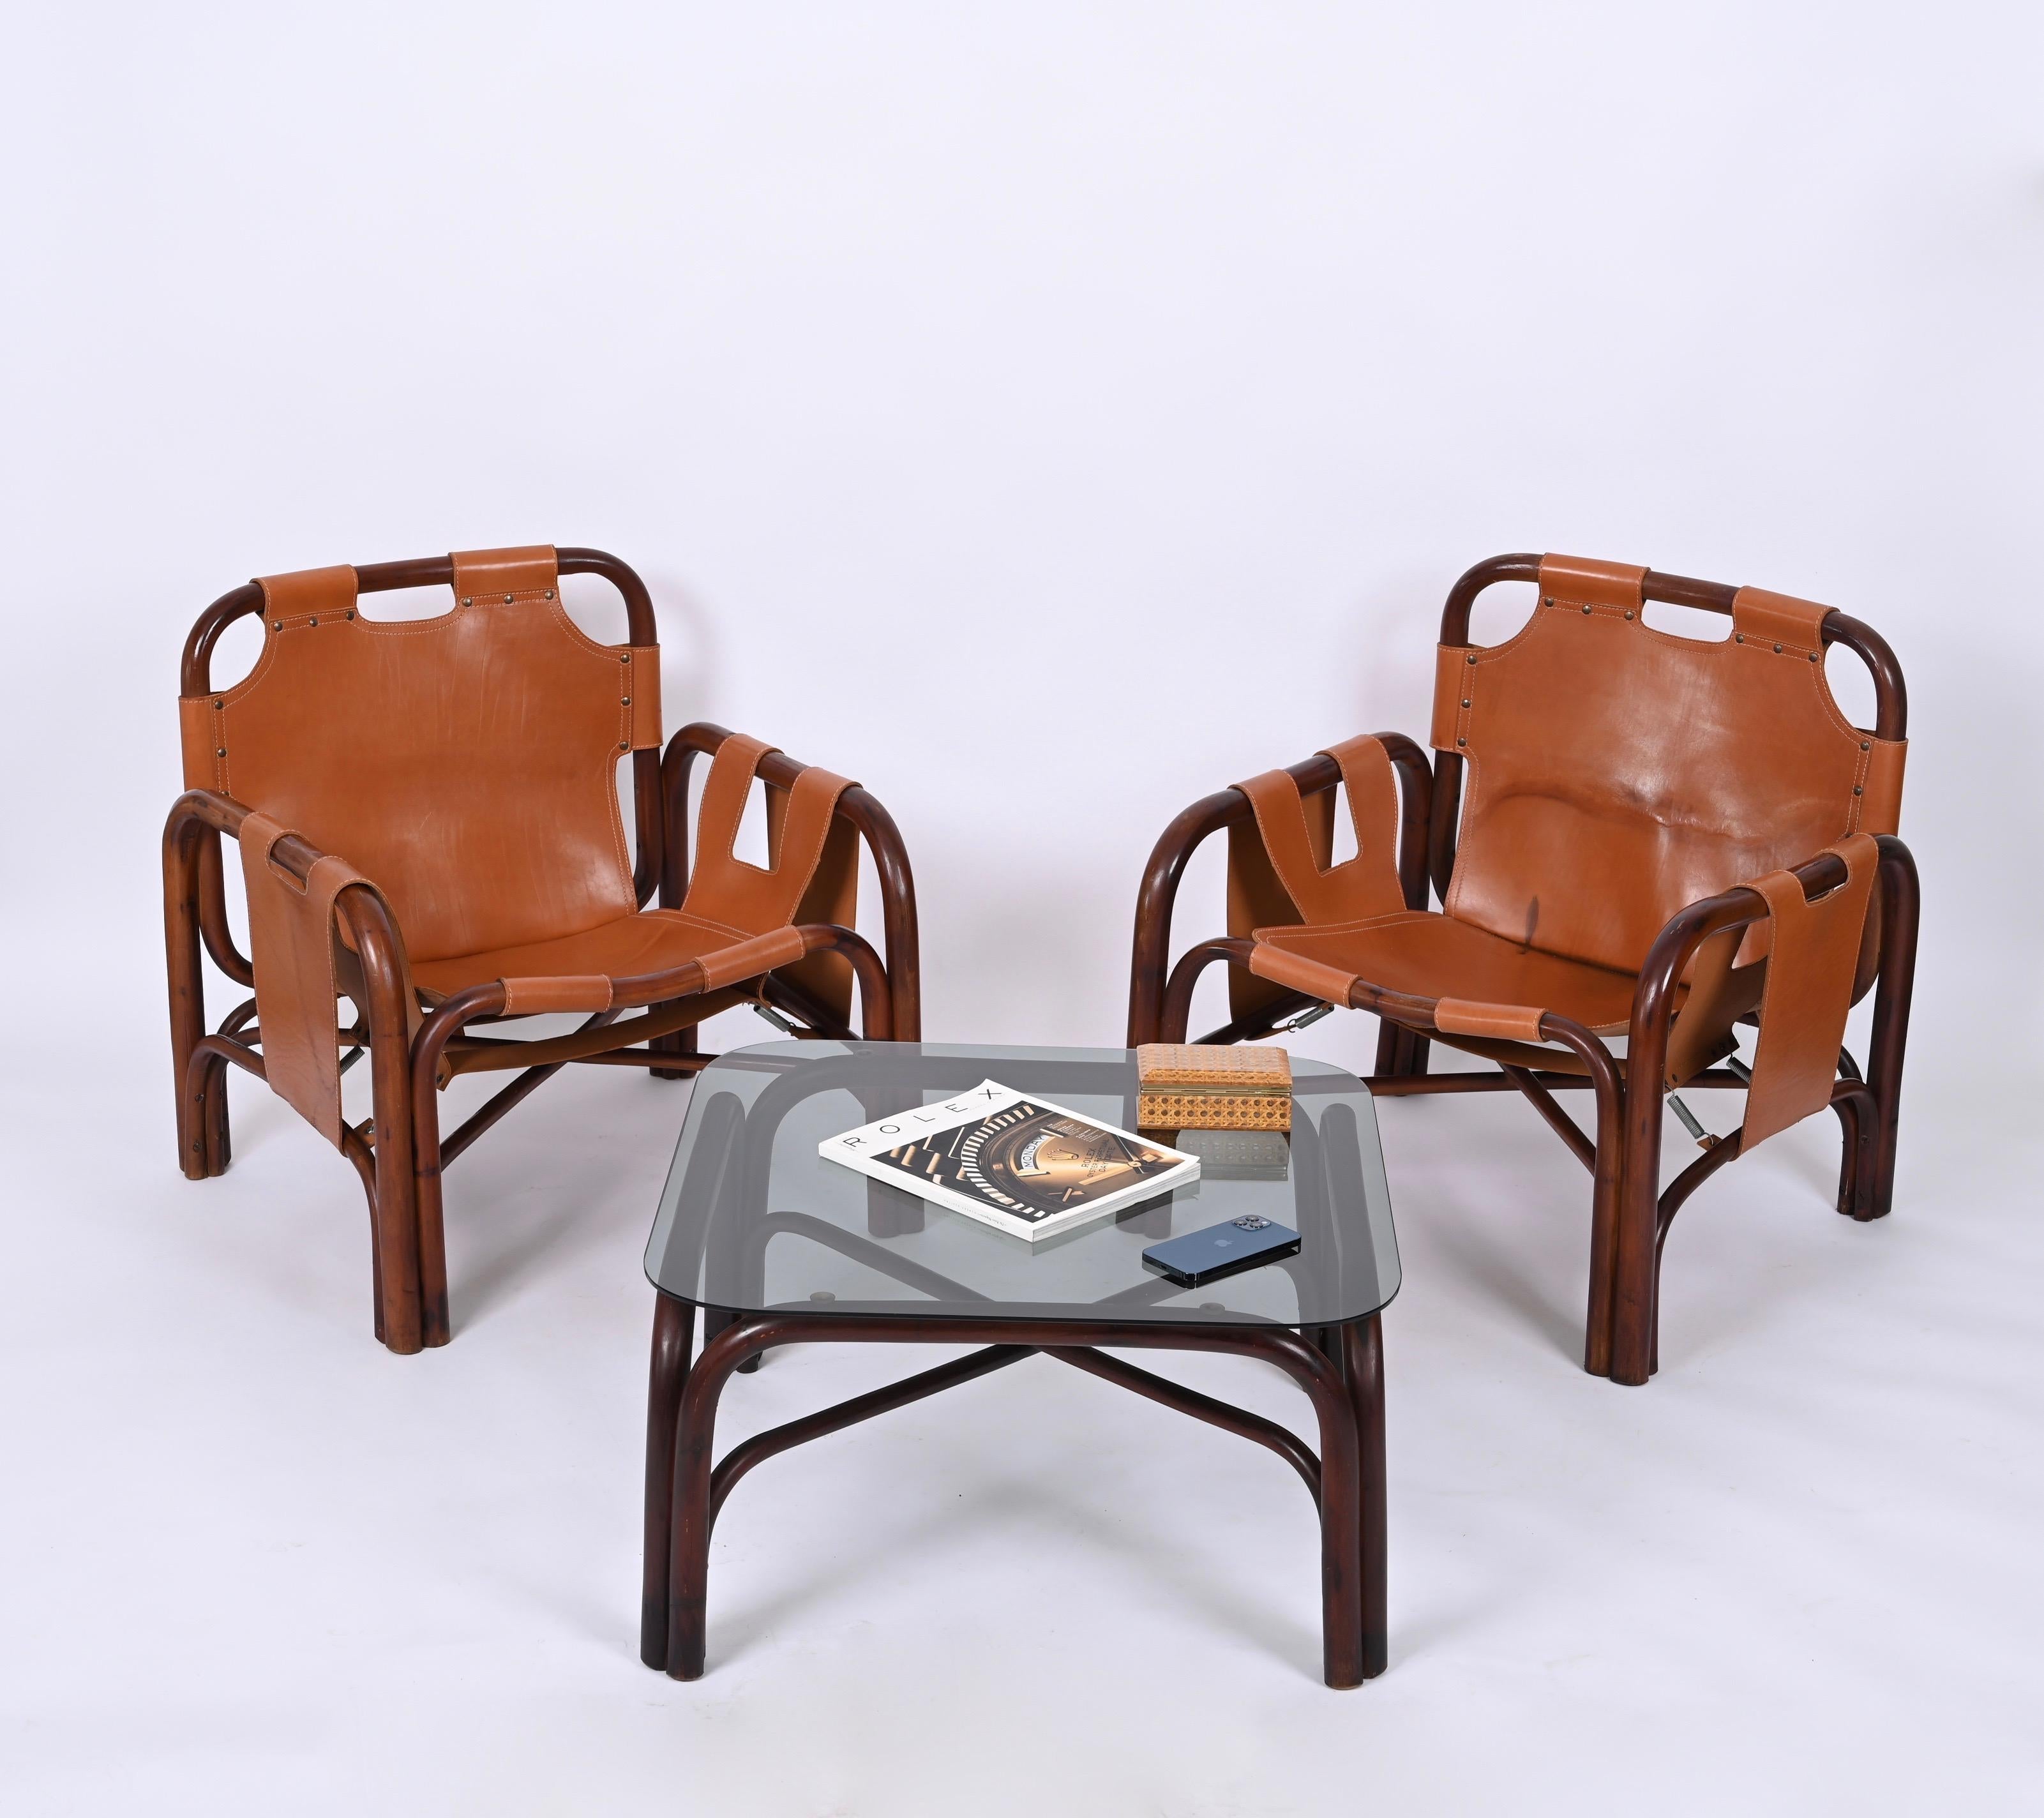 Set of Midcentury Pair of Bamboo and Leather Italian Armchairs and Table, 1960s For Sale 8